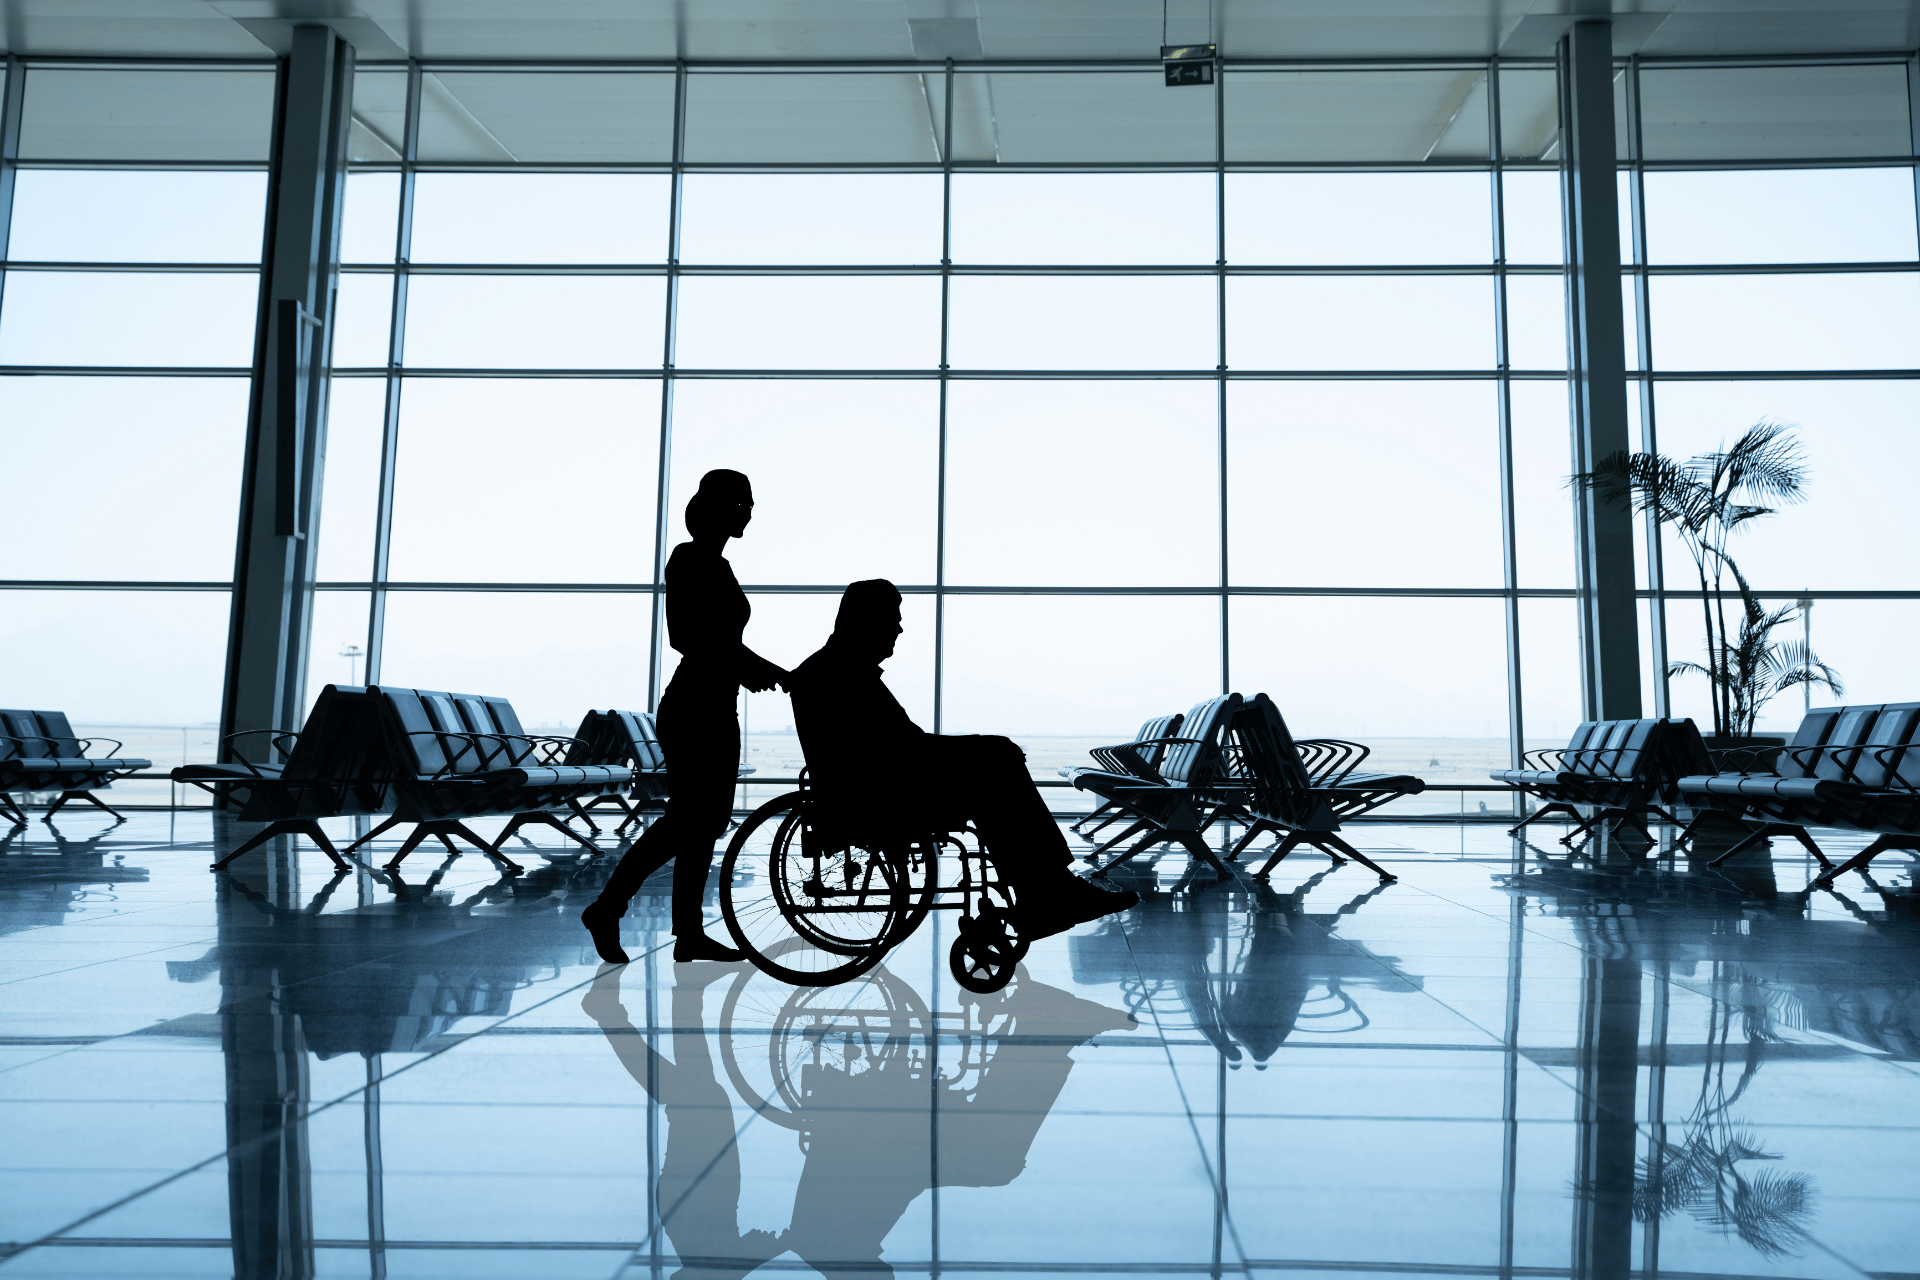 Picture of people, including person in a wheelchair at an airport